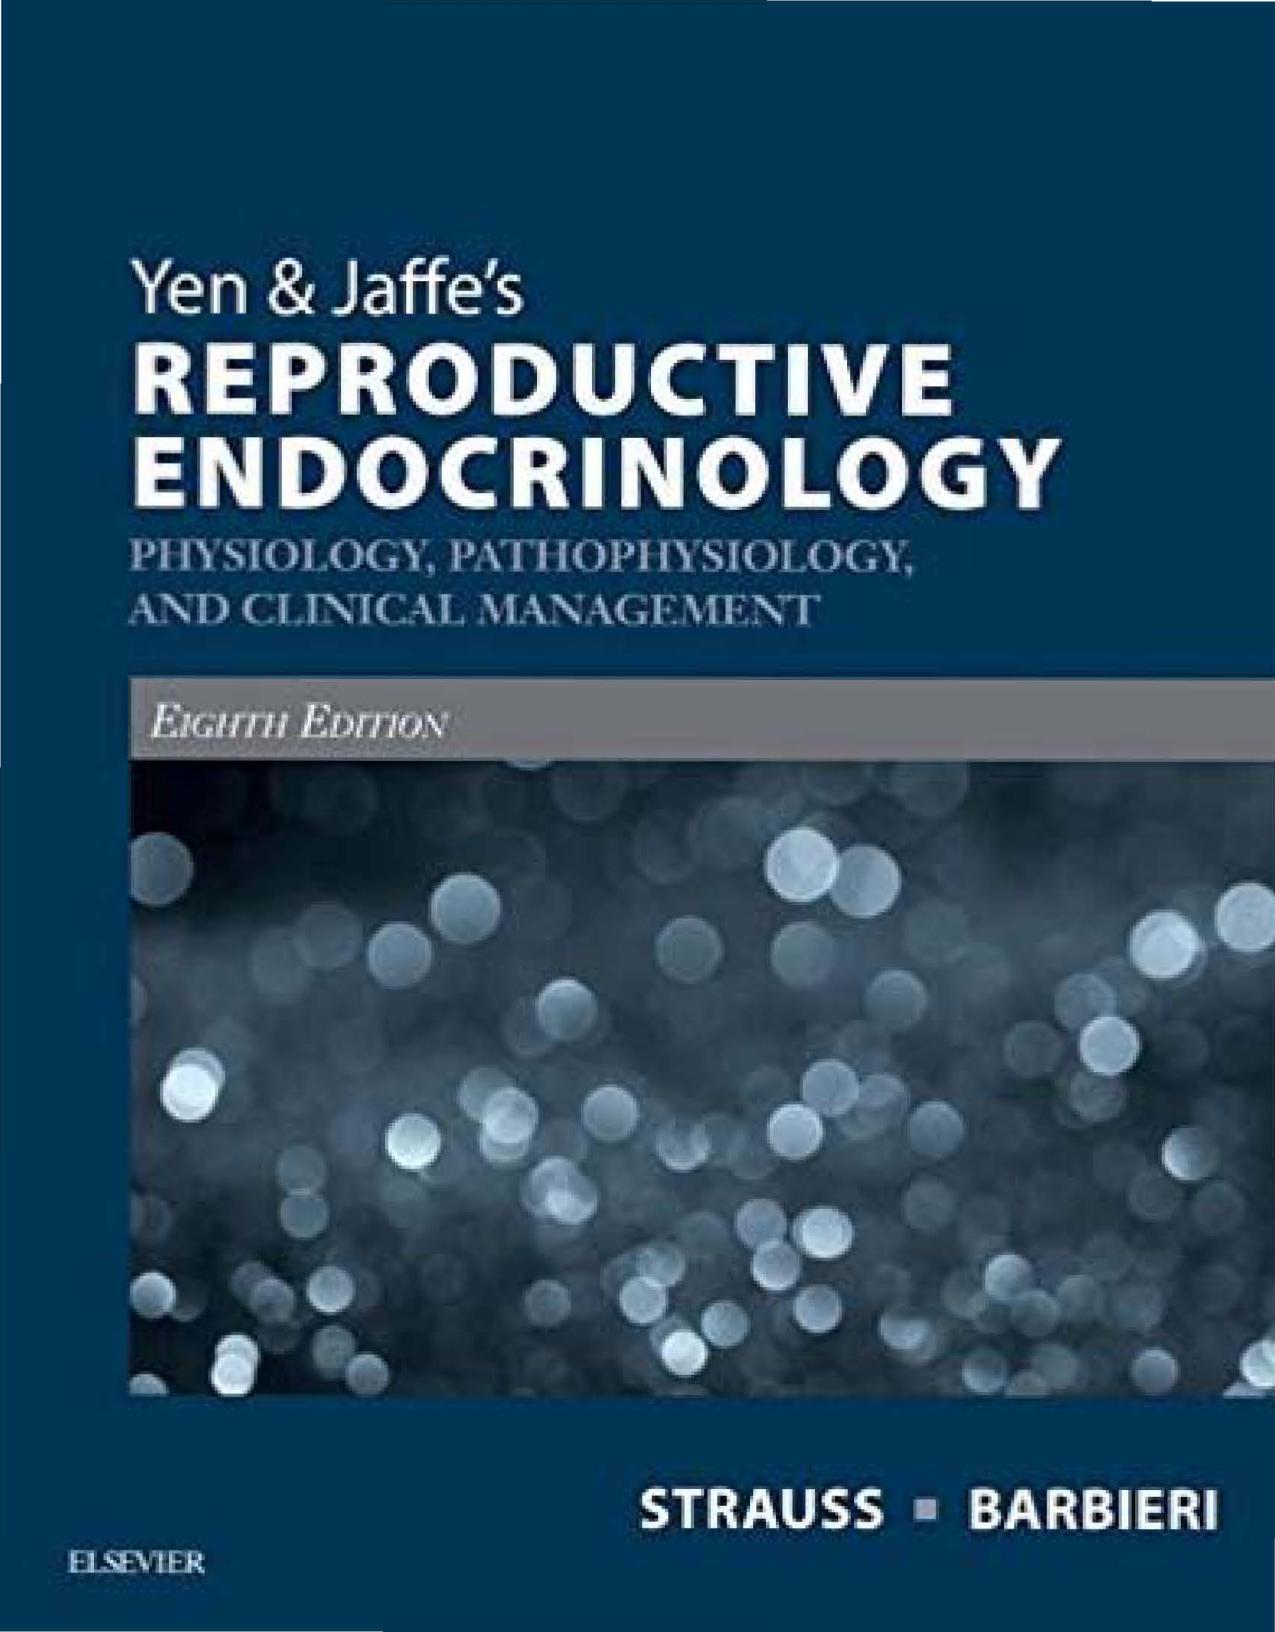 YEN AND JAFFE'S REPRODUCTIVE ENDOCRINOLOGY